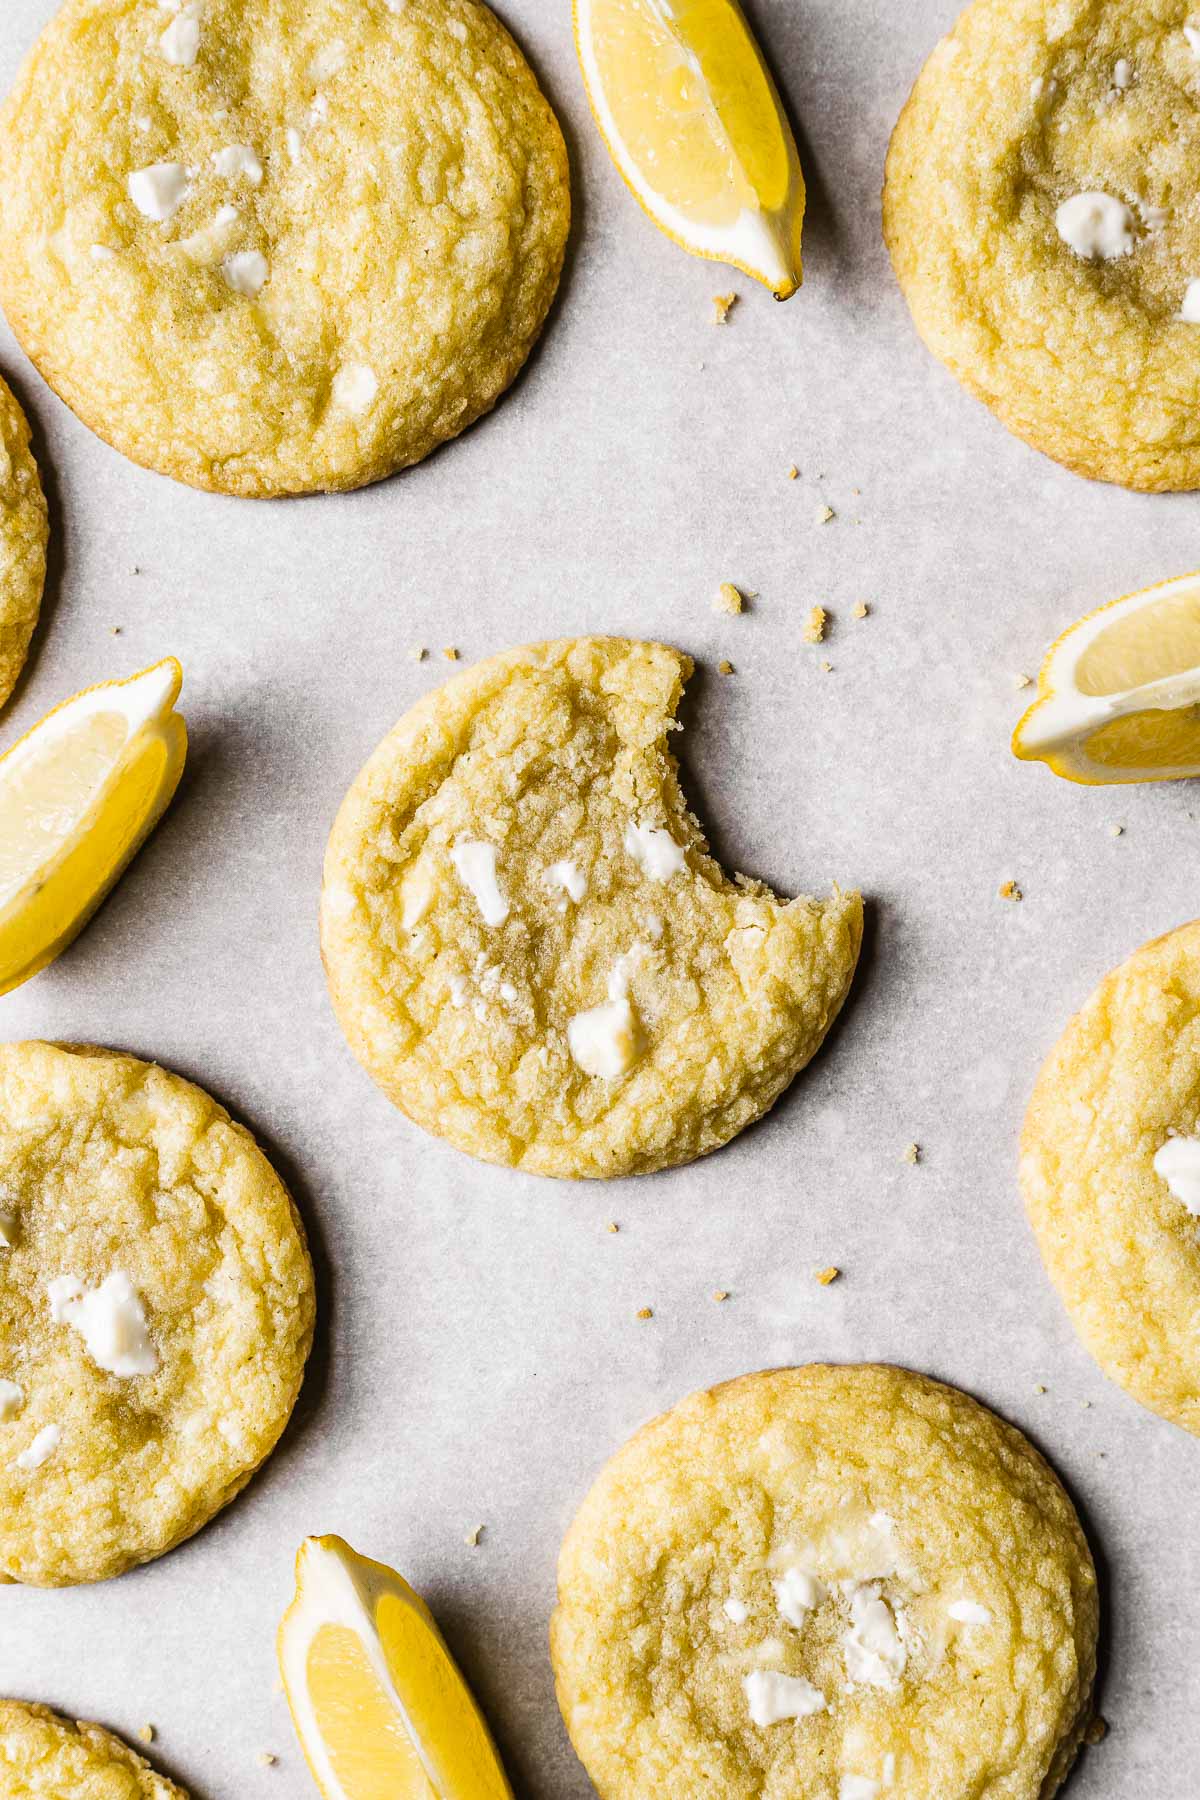 A lemon cookie with a bite taken out of it is surrounded by more cookies and lemon wedges on white parchment paper.